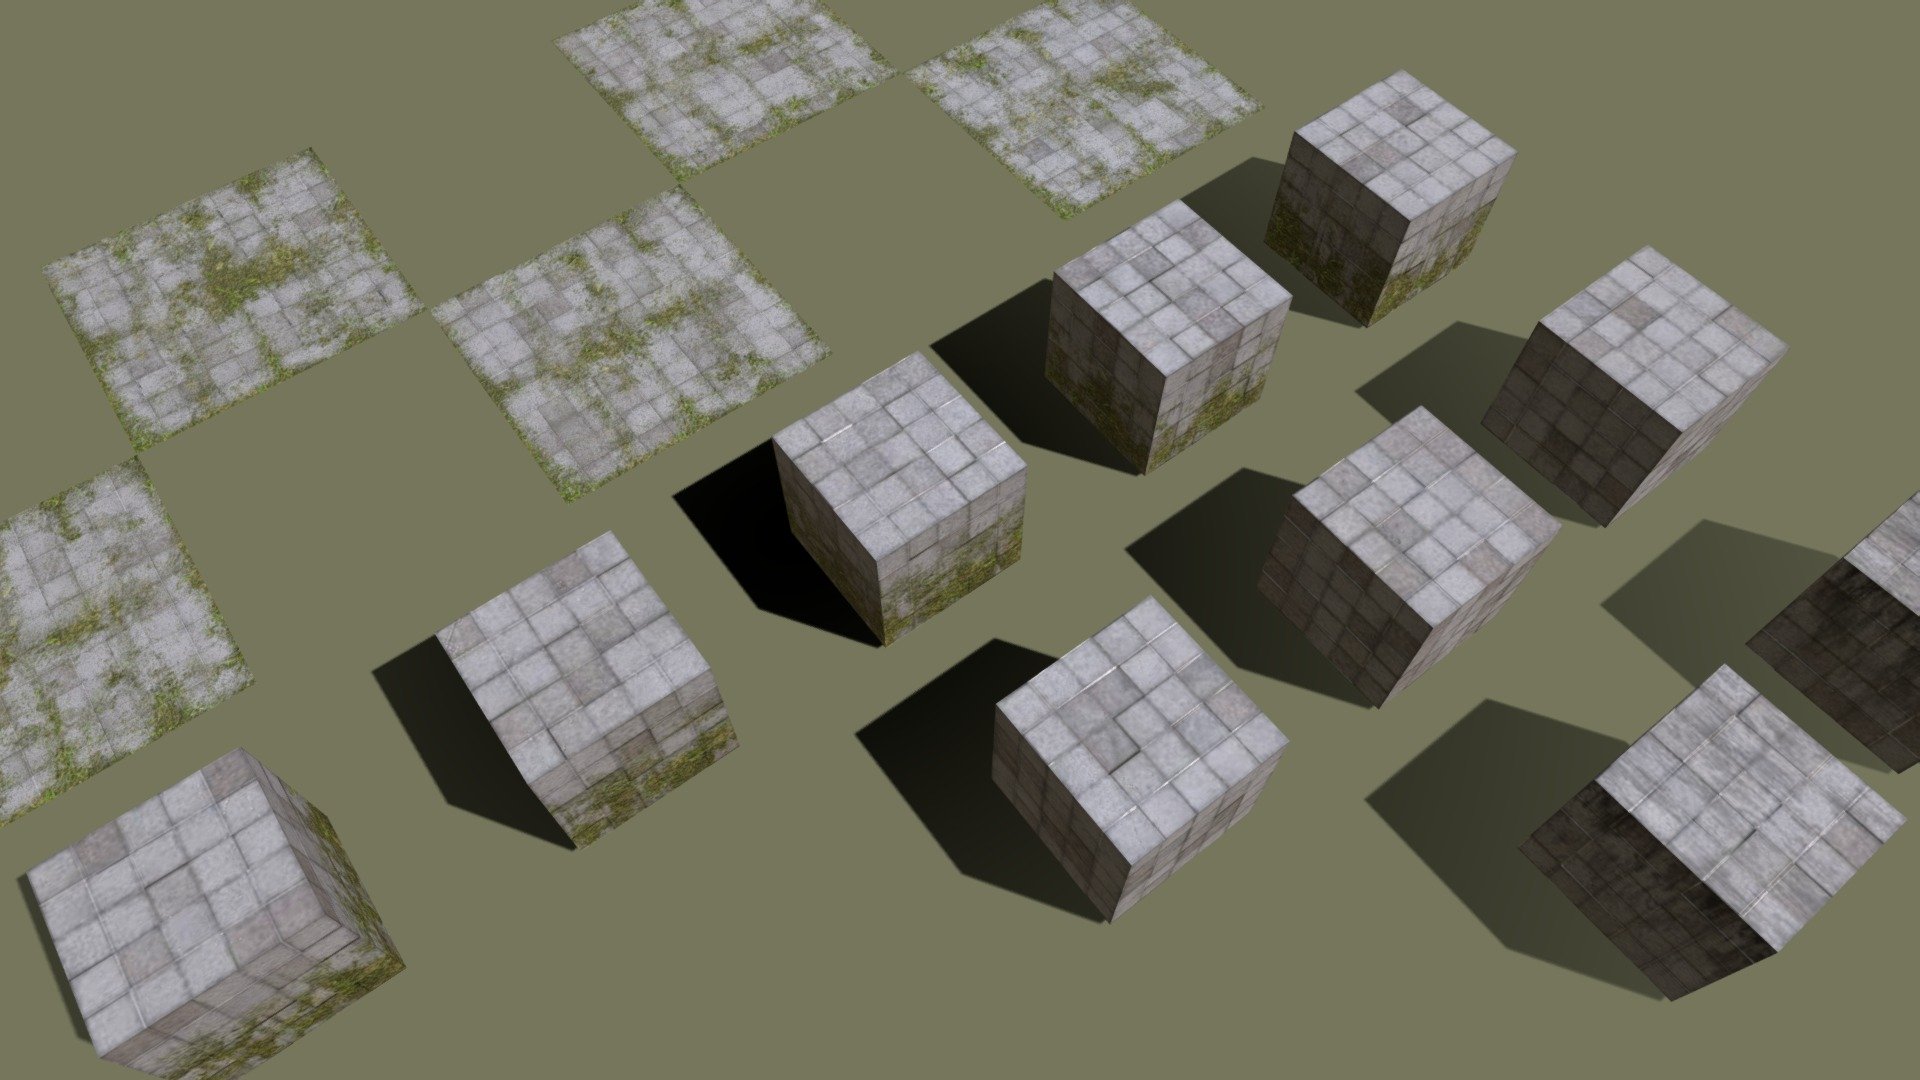 Cast blocks - floors and walls. Made for tiling. Blocks are 5 meters cubed. Floors are 10 meters squared. 

Textures:
Blocks: 512x512
Floors: 1024x1024 - Tileable Cast Blocks - Buy Royalty Free 3D model by LB3D (@alienated) 3d model